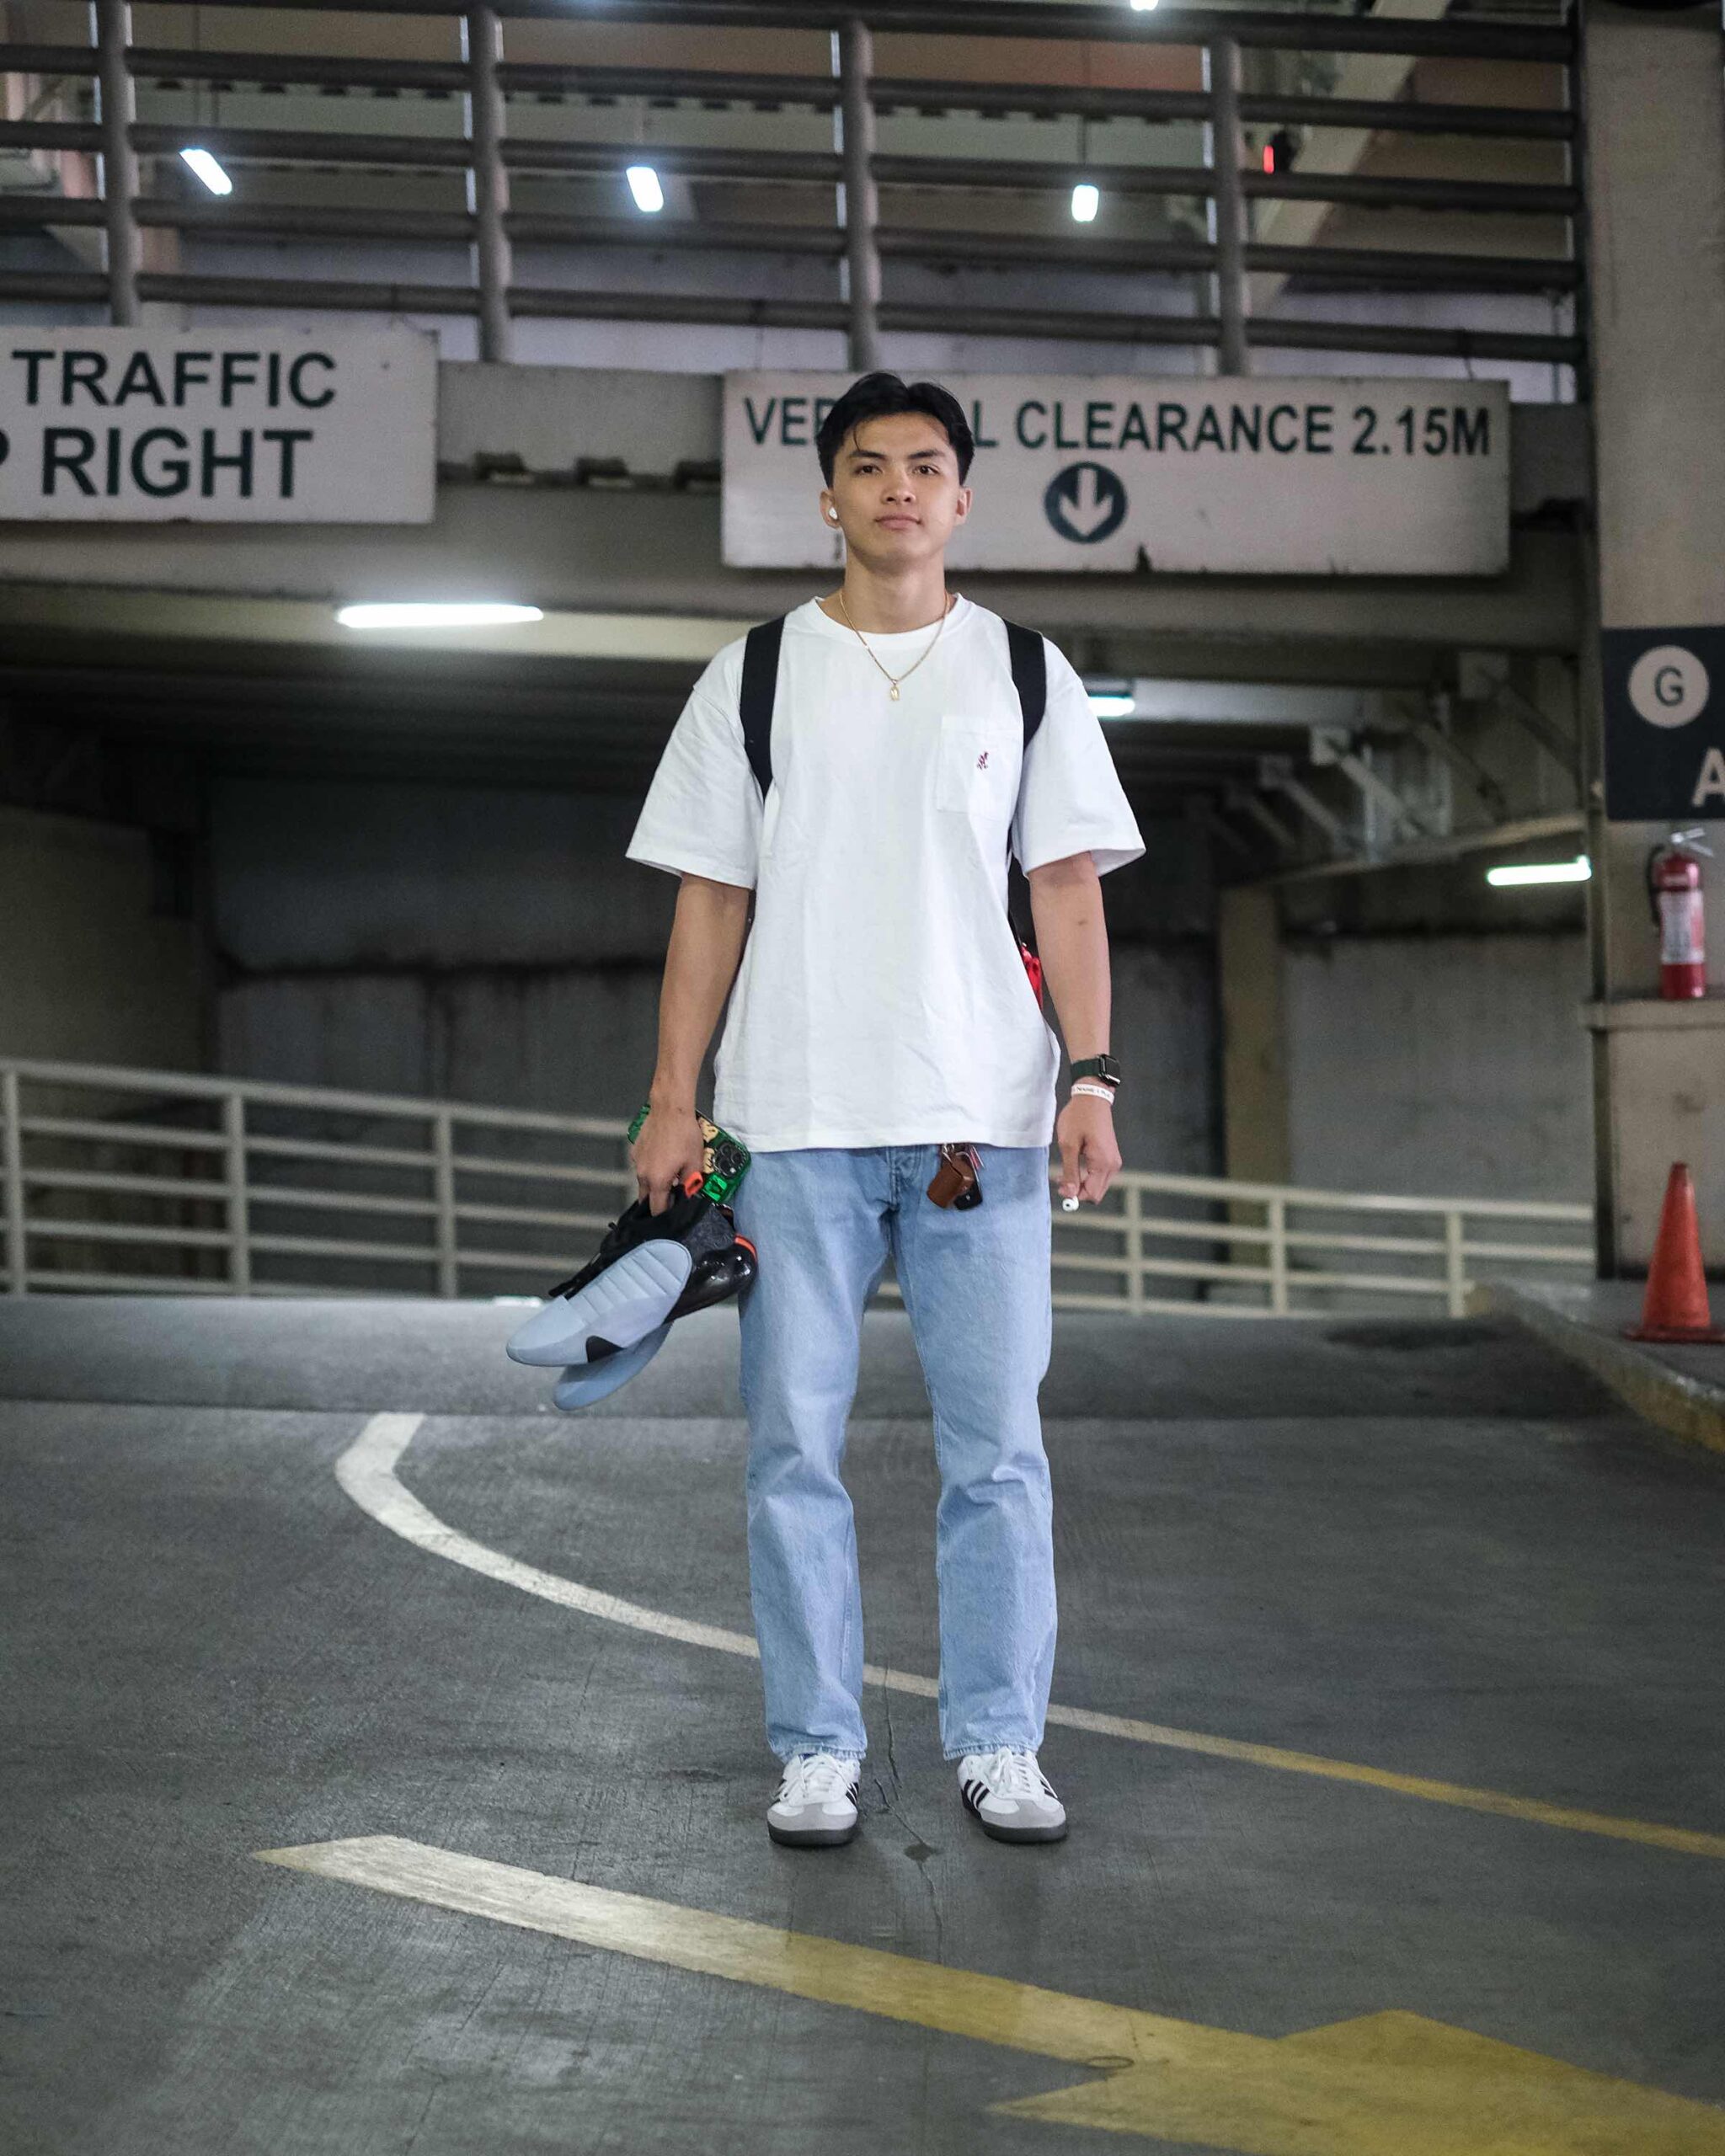 The GAME UAAP Tunnel Vision Fashion Trends: Harold Alarcon (UP Fighting Maroons)